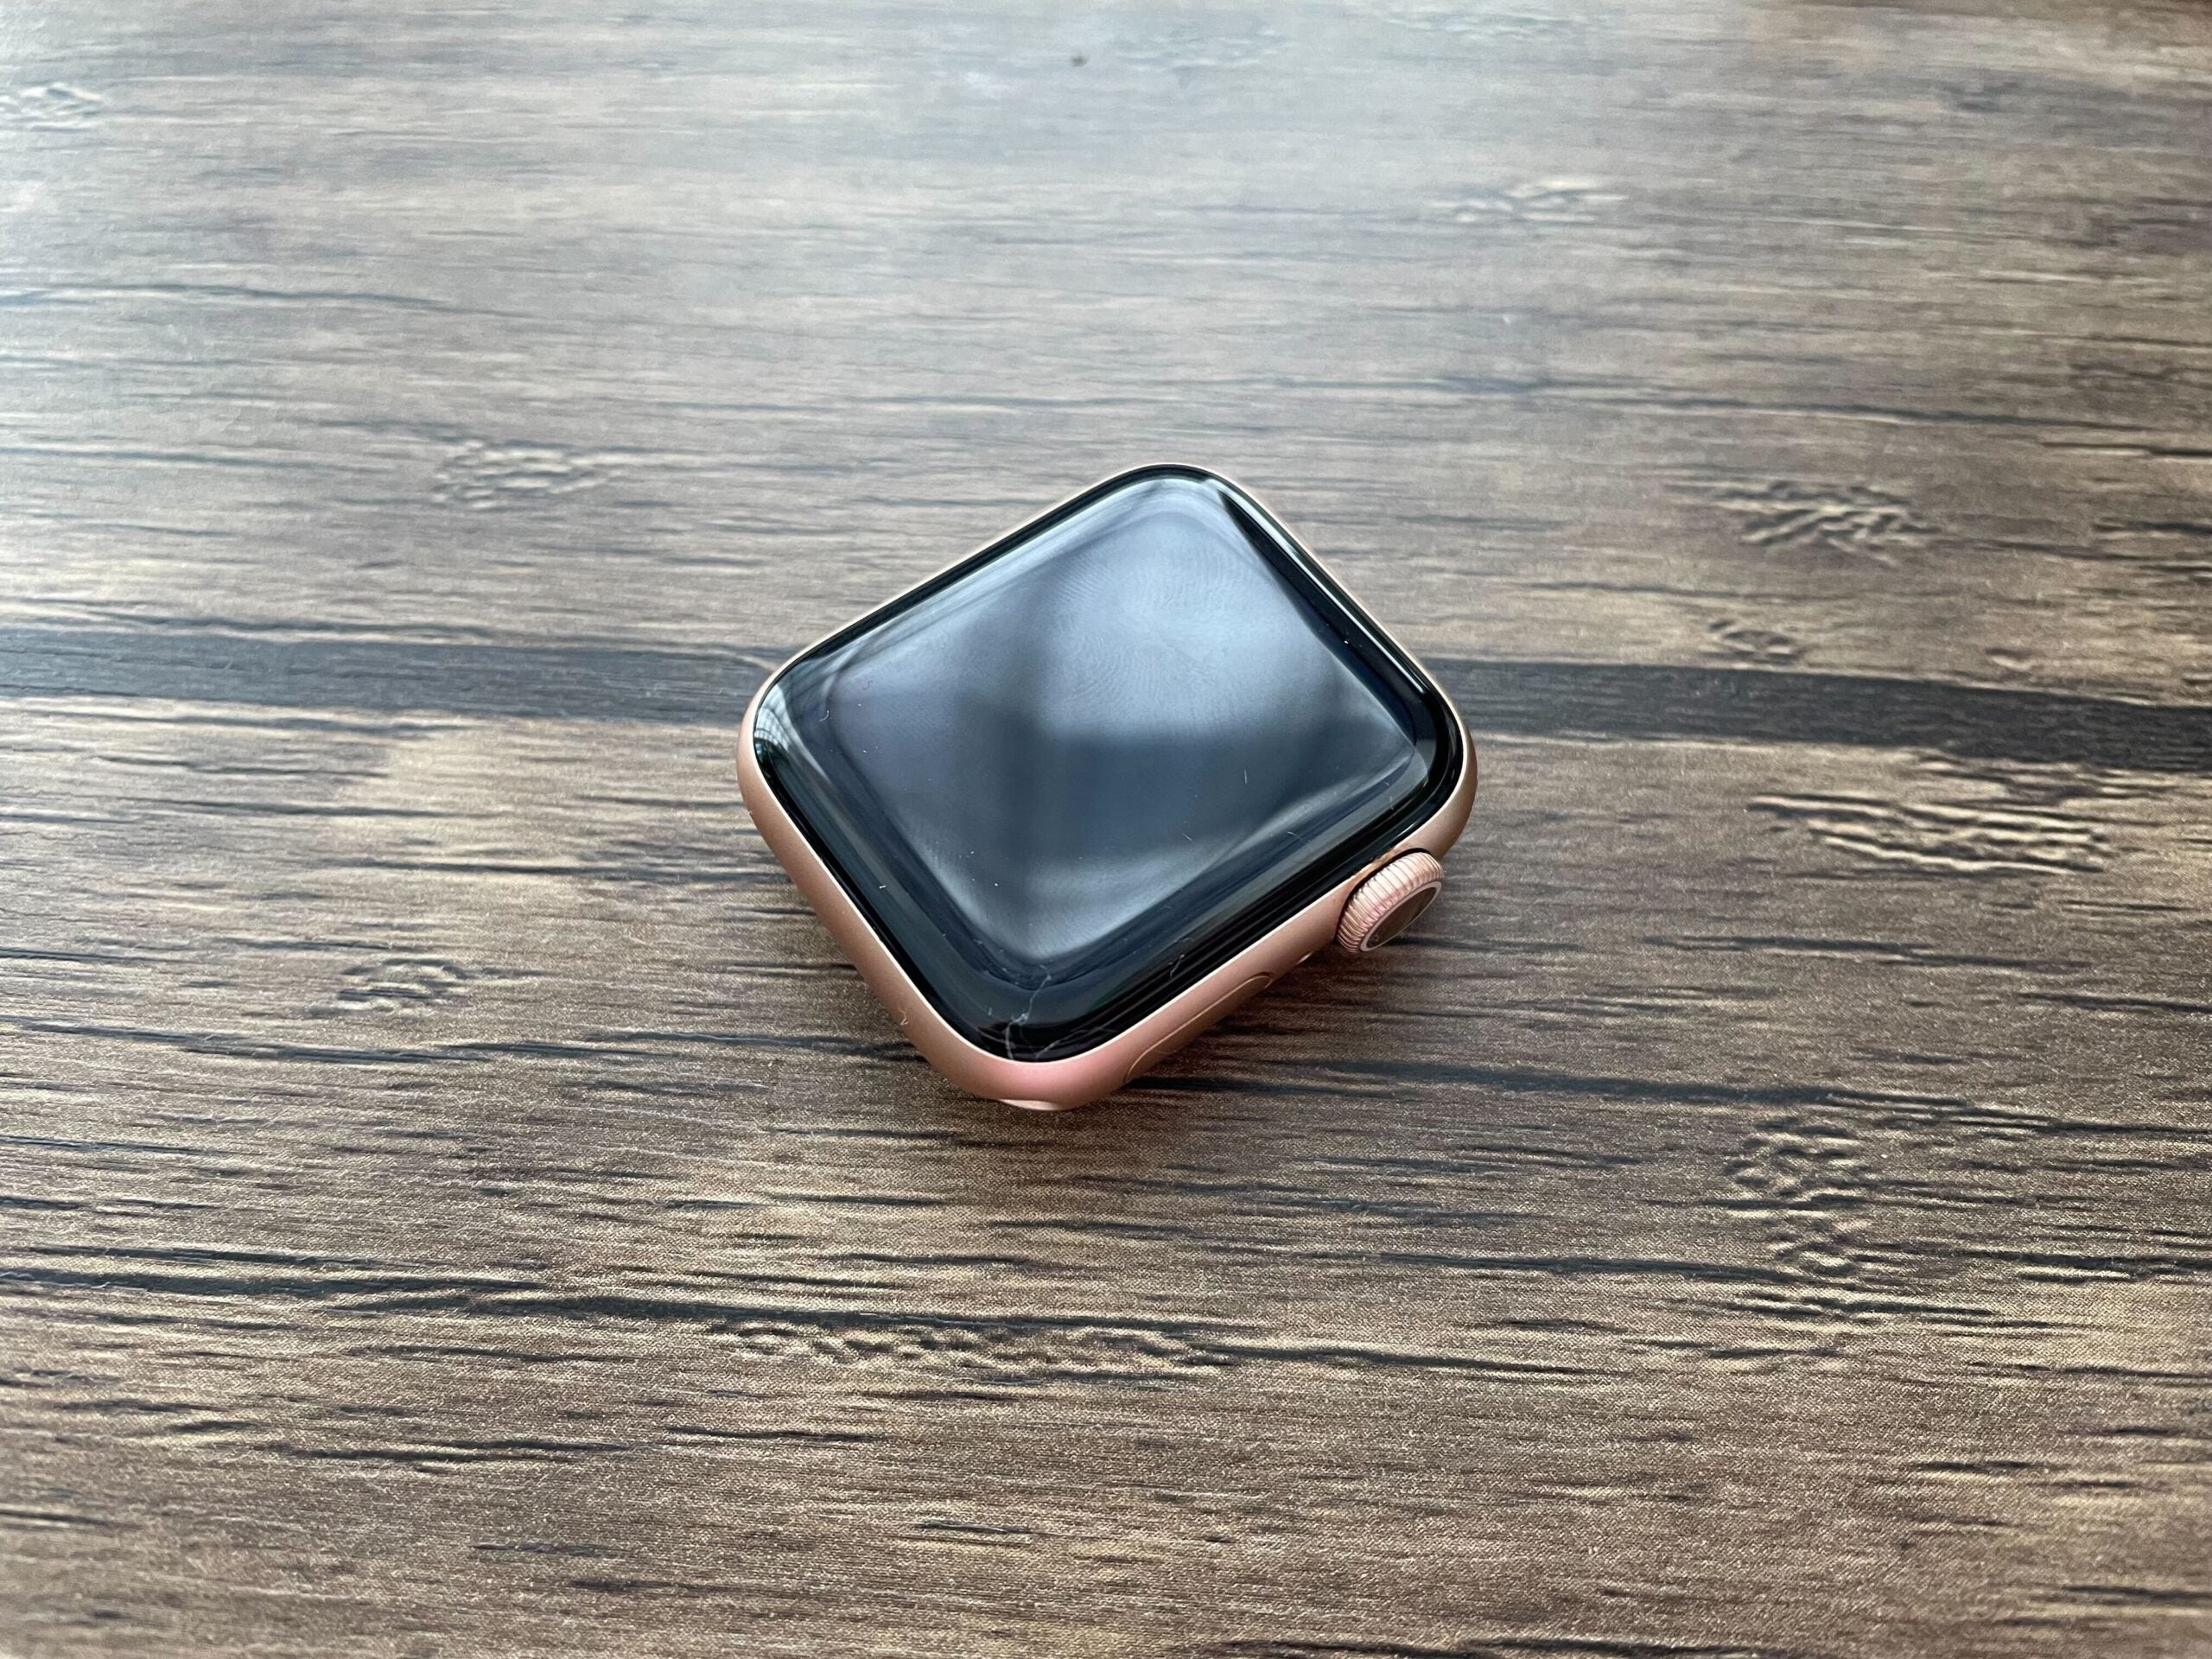 Flip your Apple Watch back up